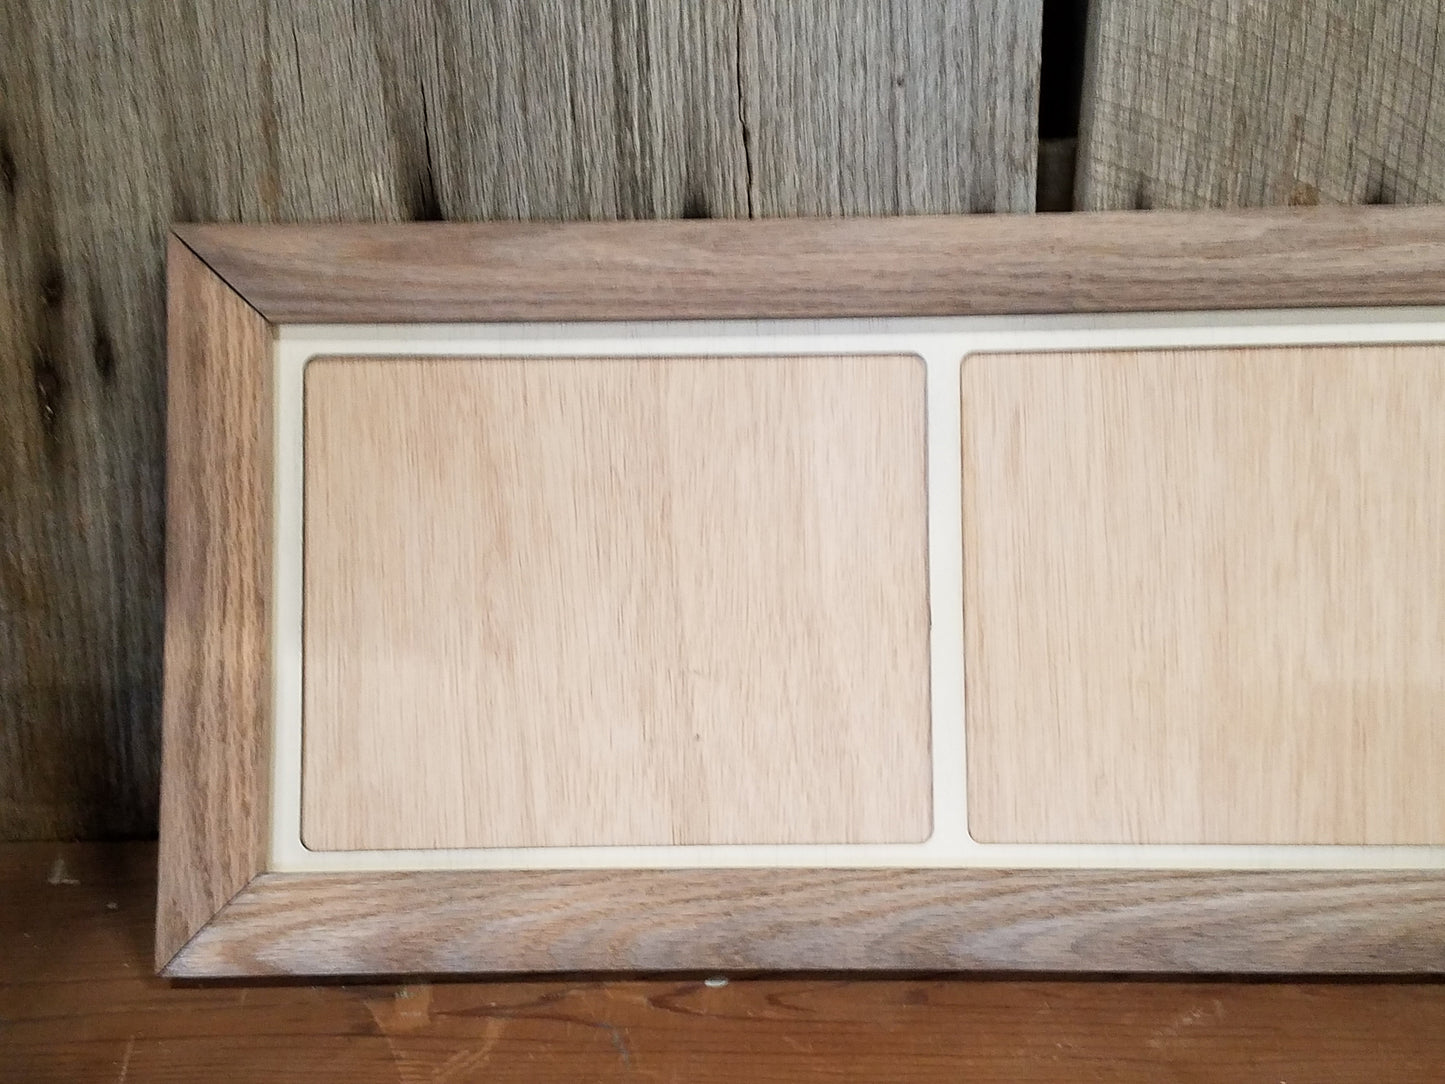 Farmhouse, 8x10, Holds 2, College, Picture Frame, Mat, Mat-board, Wood, Weathered Oak, Handmade, Country, Rustic, Primitive, Multiple